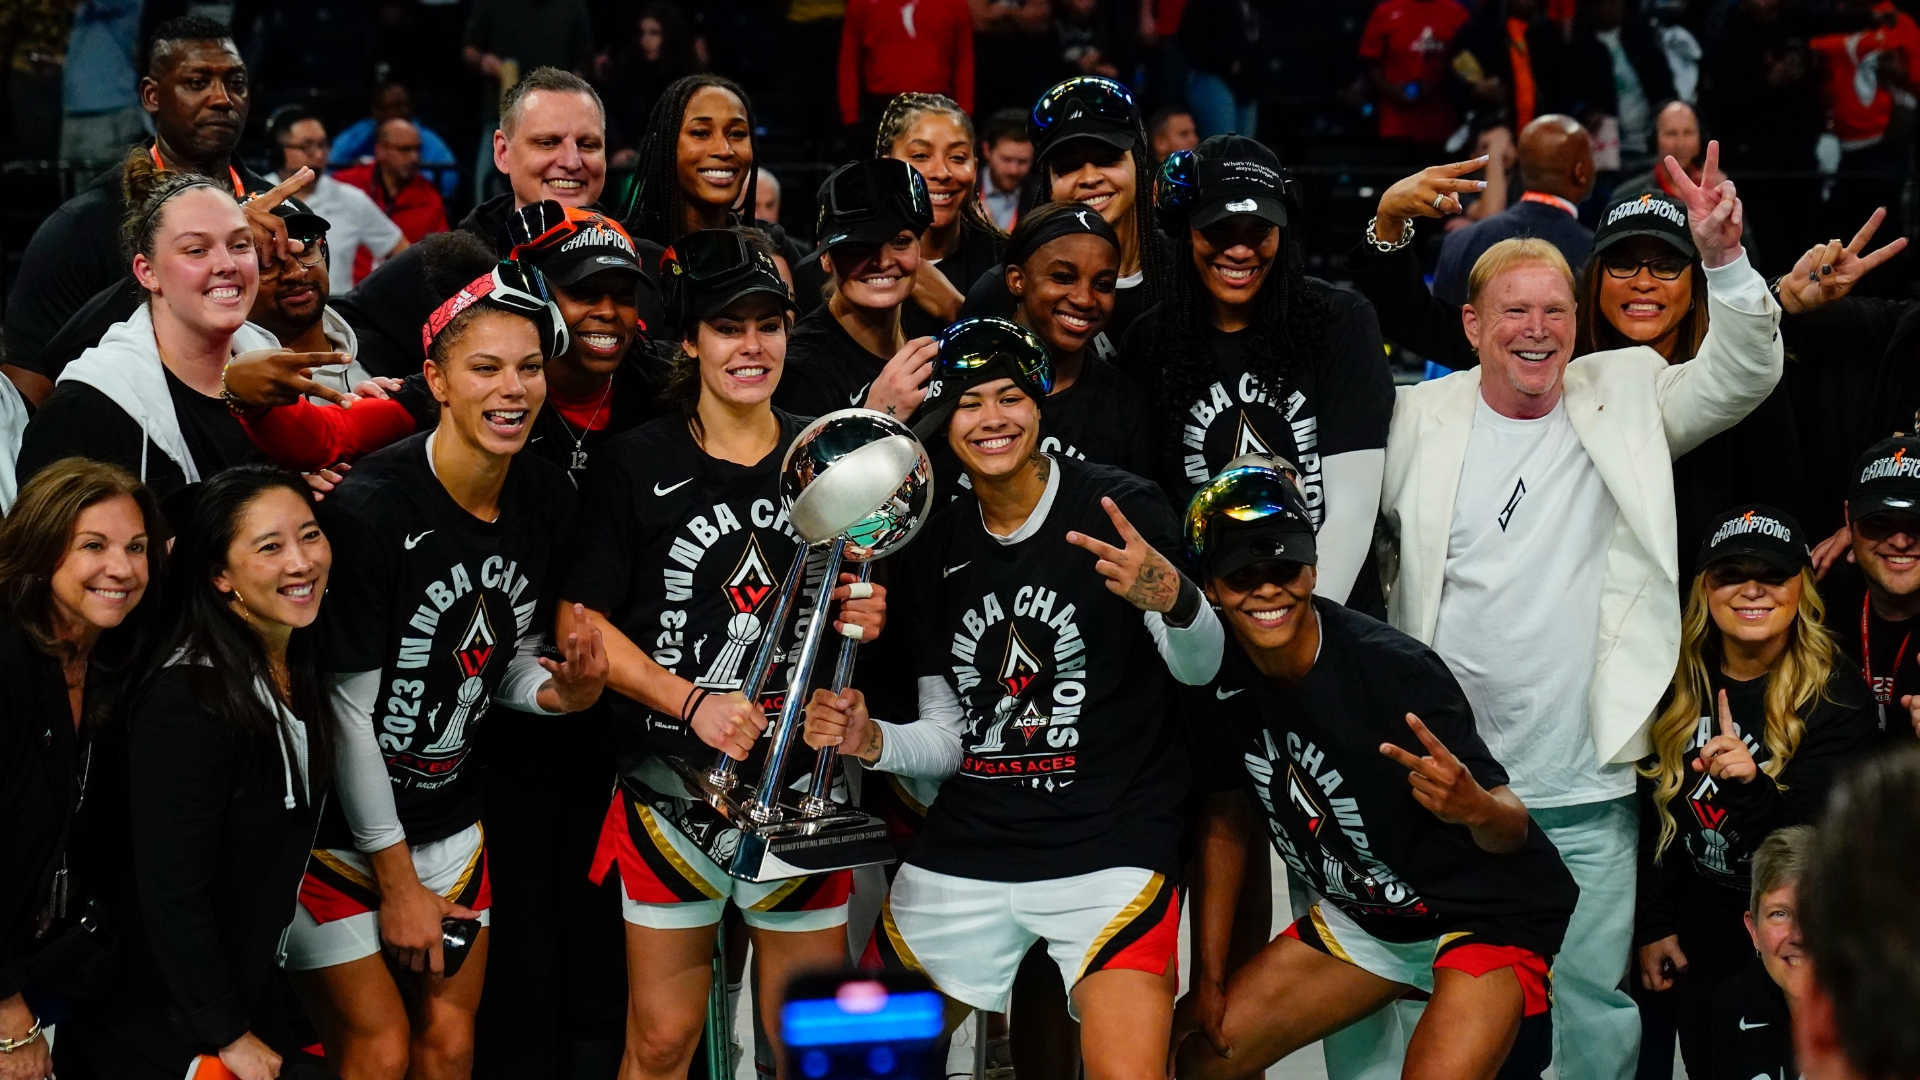 Stream Las Vegas Aces Back To Back Wnba Champions 2023 Shirt by